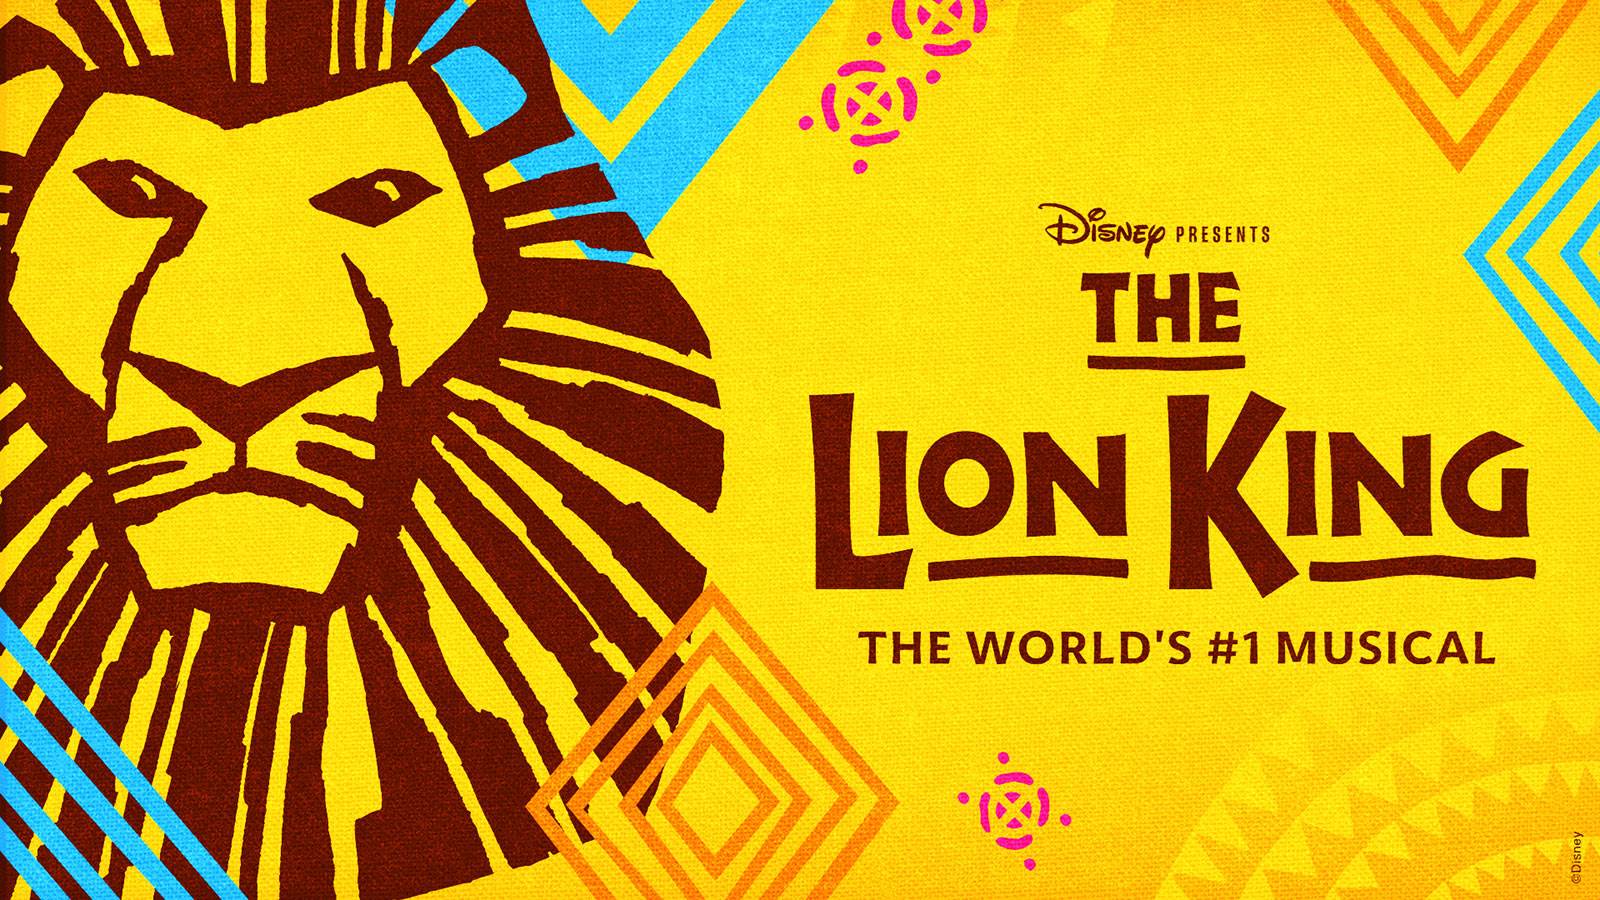 The Lion King title treatment featuring an illustration of a lion.